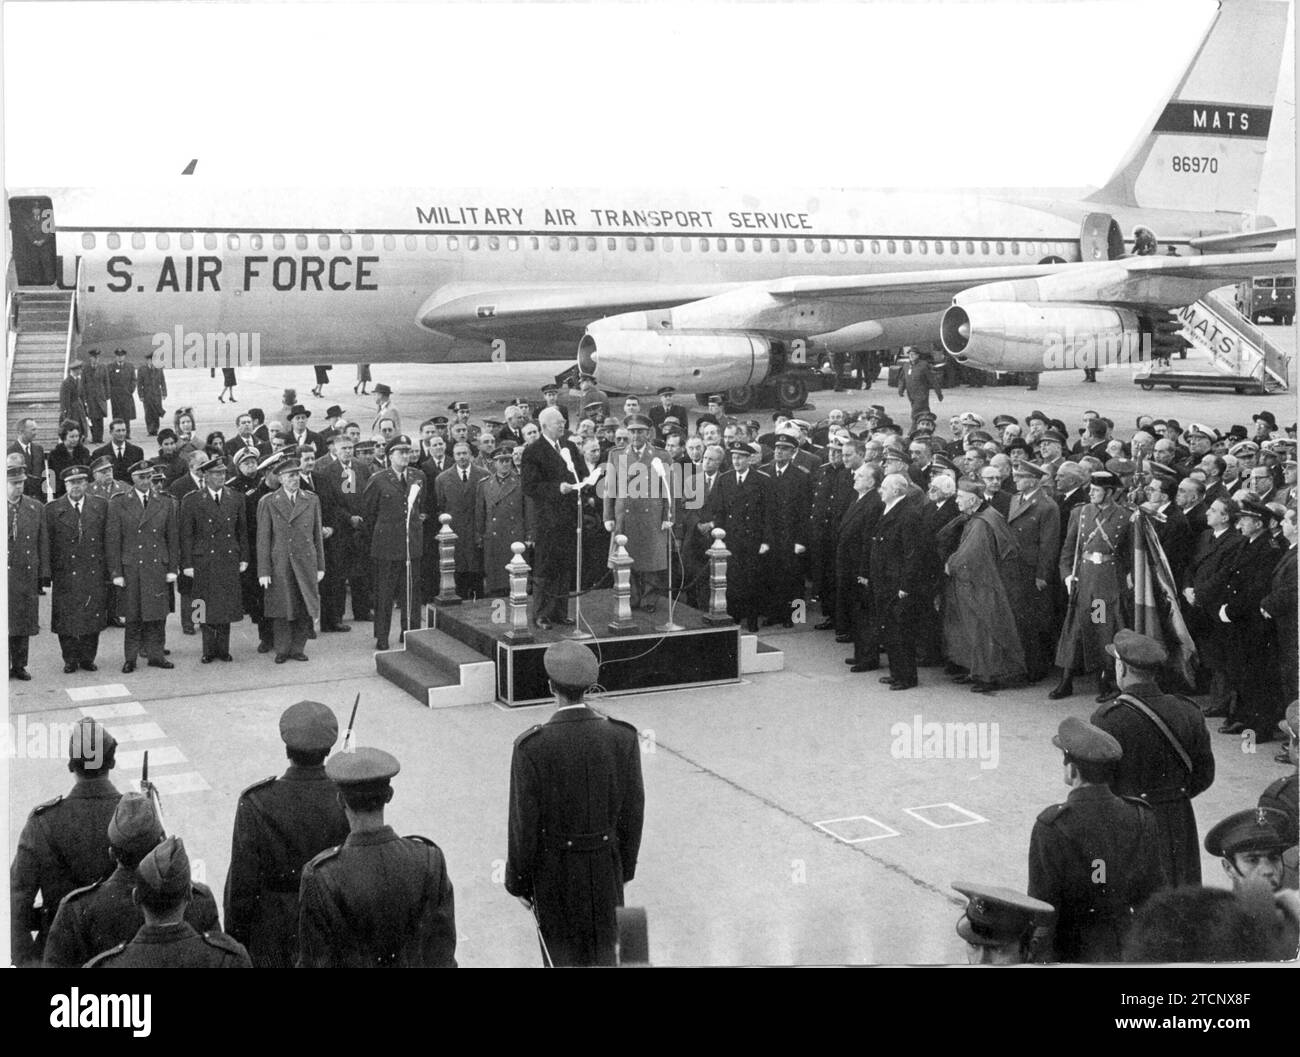 Torrejón de Ardoz (Madrid), 12/21/1959. Ike Eisenhower, then president of the United States, arrived in Madrid for a short visit to our country. Franco met him at the Barajas airport, at the foot of the plane stairs, to welcome him. His visit meant, in fact, international acceptance of his regime. Credit: Album / Archivo ABC / Manuel Sanz Bermejo Stock Photo